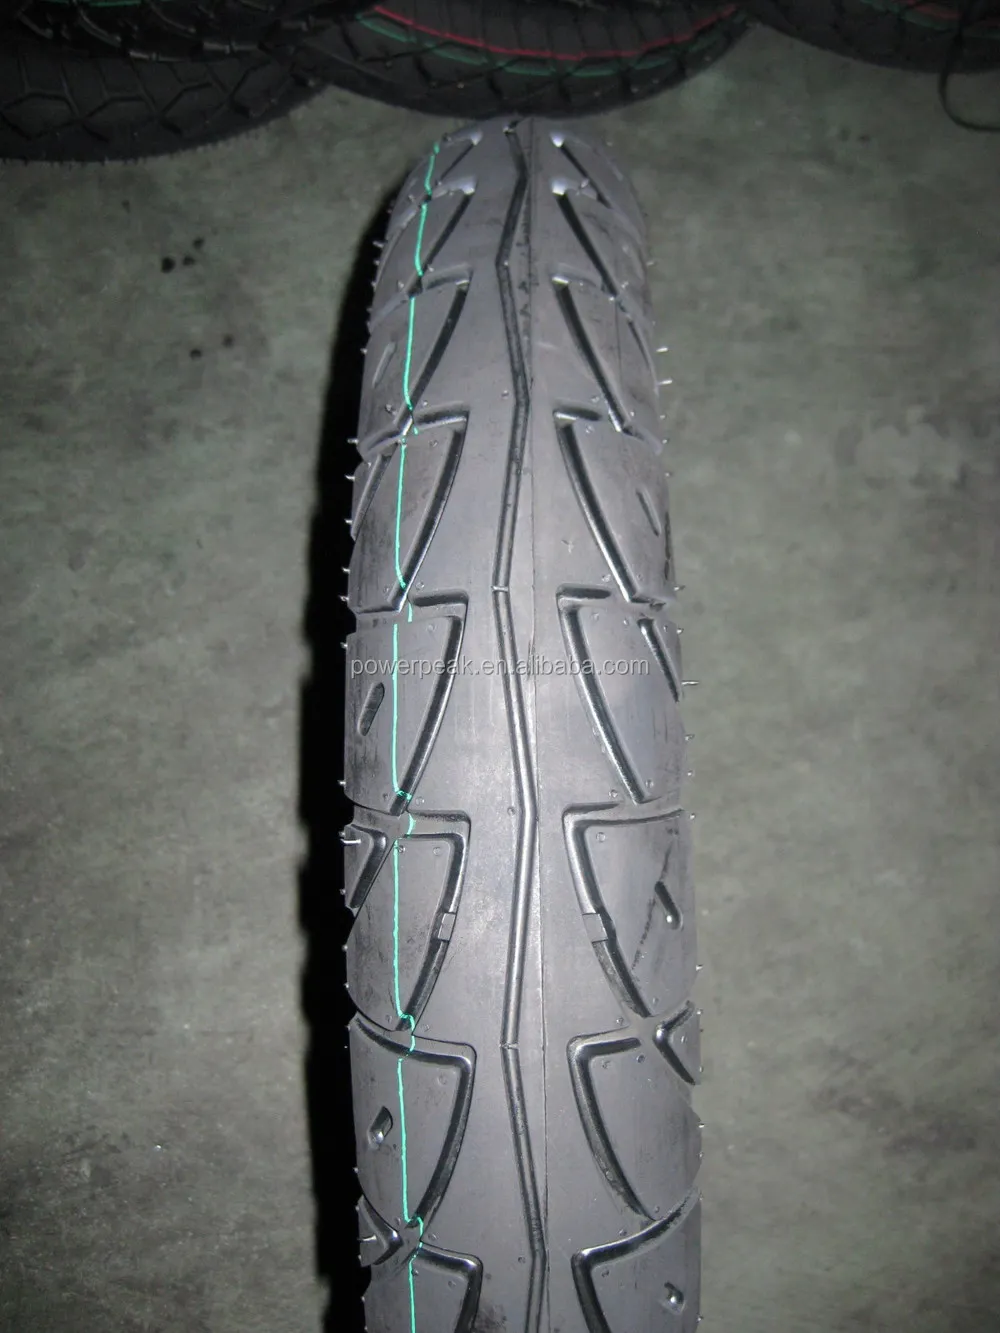 Tyres 135 10 400 10 Tricycle Tire 135x10 400x10 Buy 400 10 Tricycle Tire Tire 135x10 135 10 Tricycle Tire Product On Alibaba Com